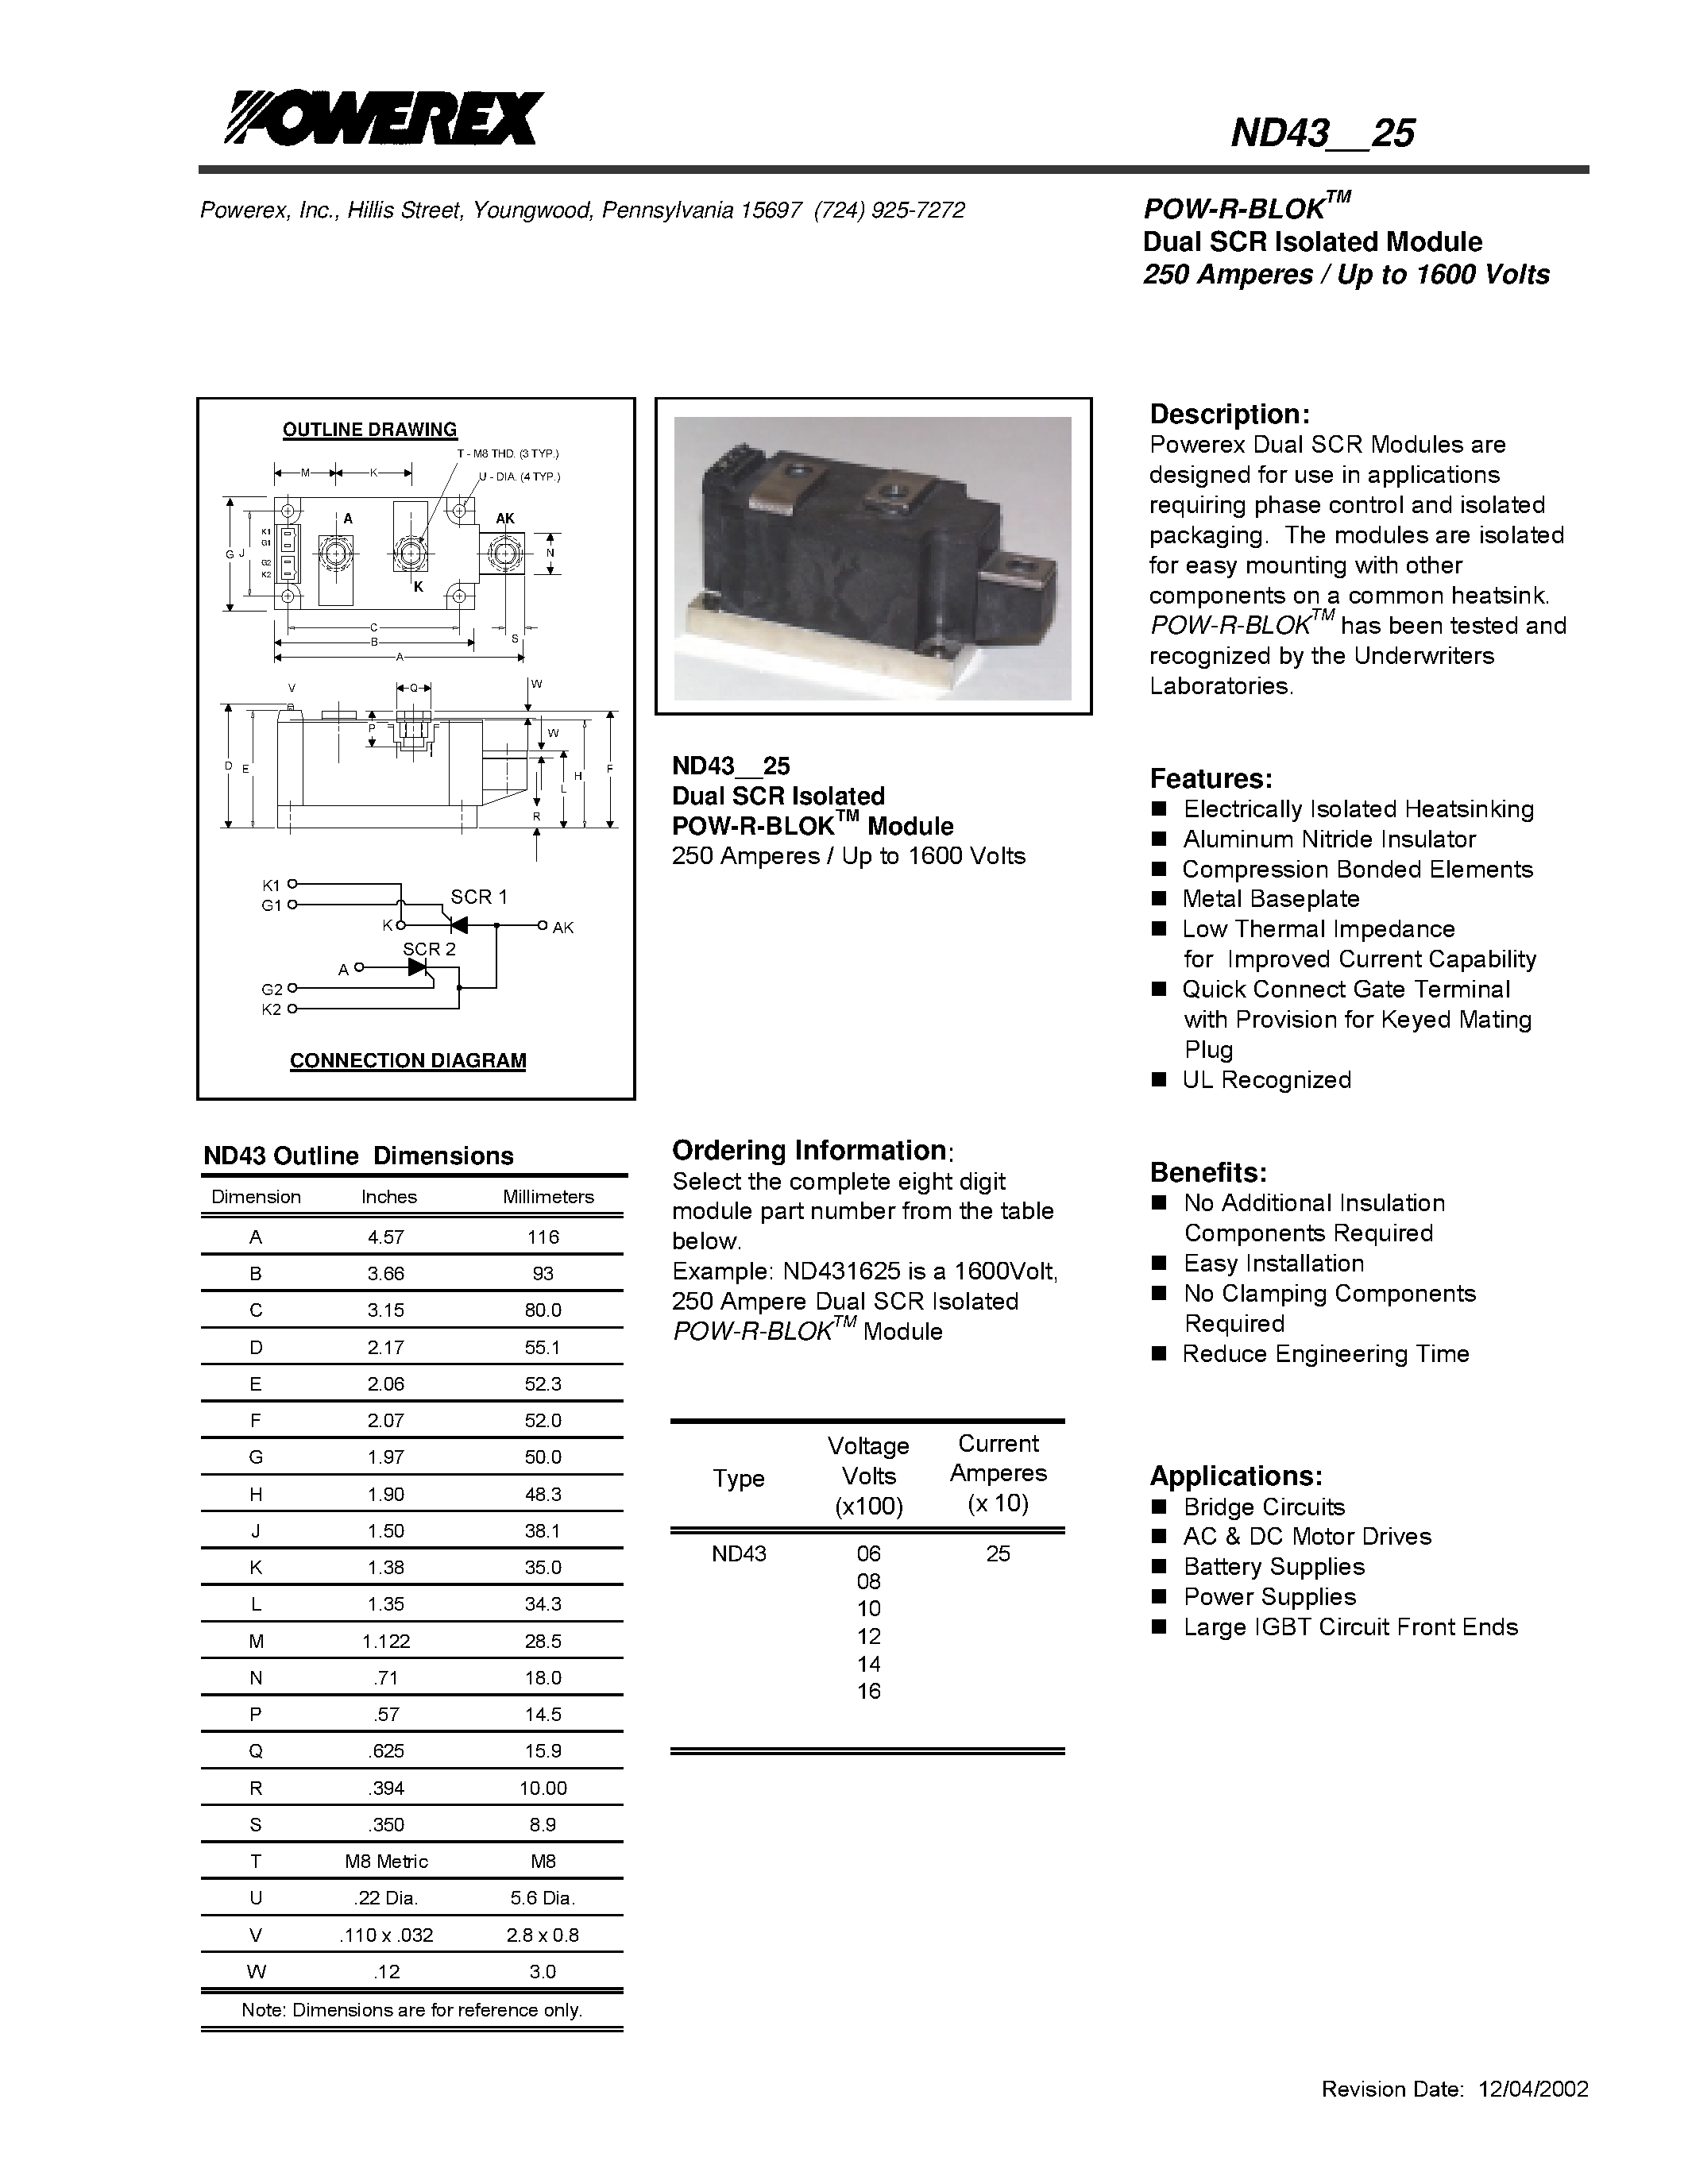 Datasheet ND431425 - POW-R-BLOK Dual SCR Isolated Module (250 Amperes / Up to 1600 Volts) page 1